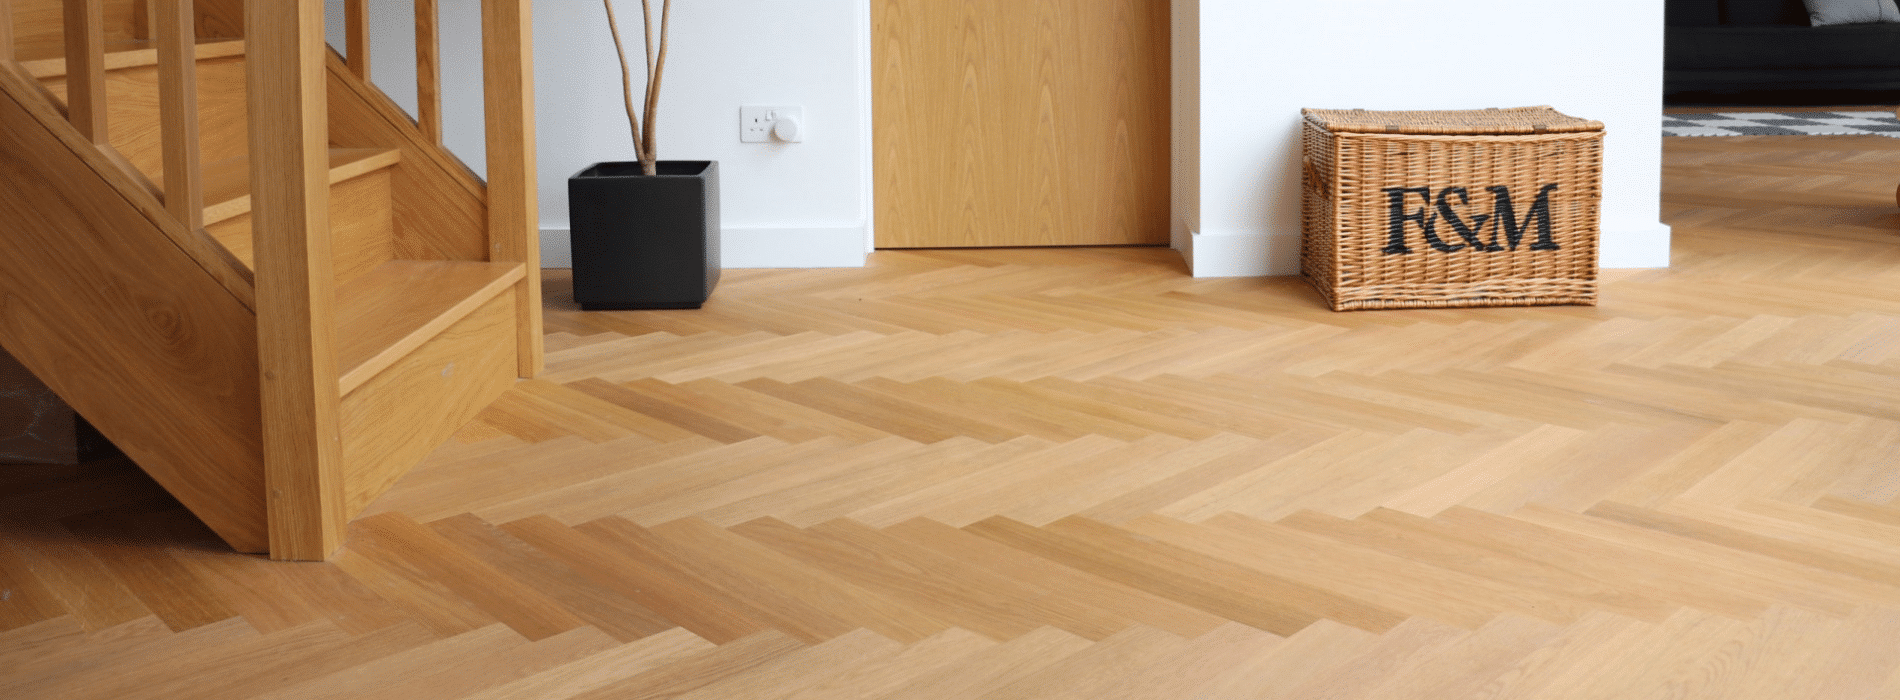 Restored engineered oak floor in Tower Hamlets, E1 by Mr Sander®. Enhanced with mid-oak stain, Junckers Strong satin finish, showcasing rich grain patterns and tones.